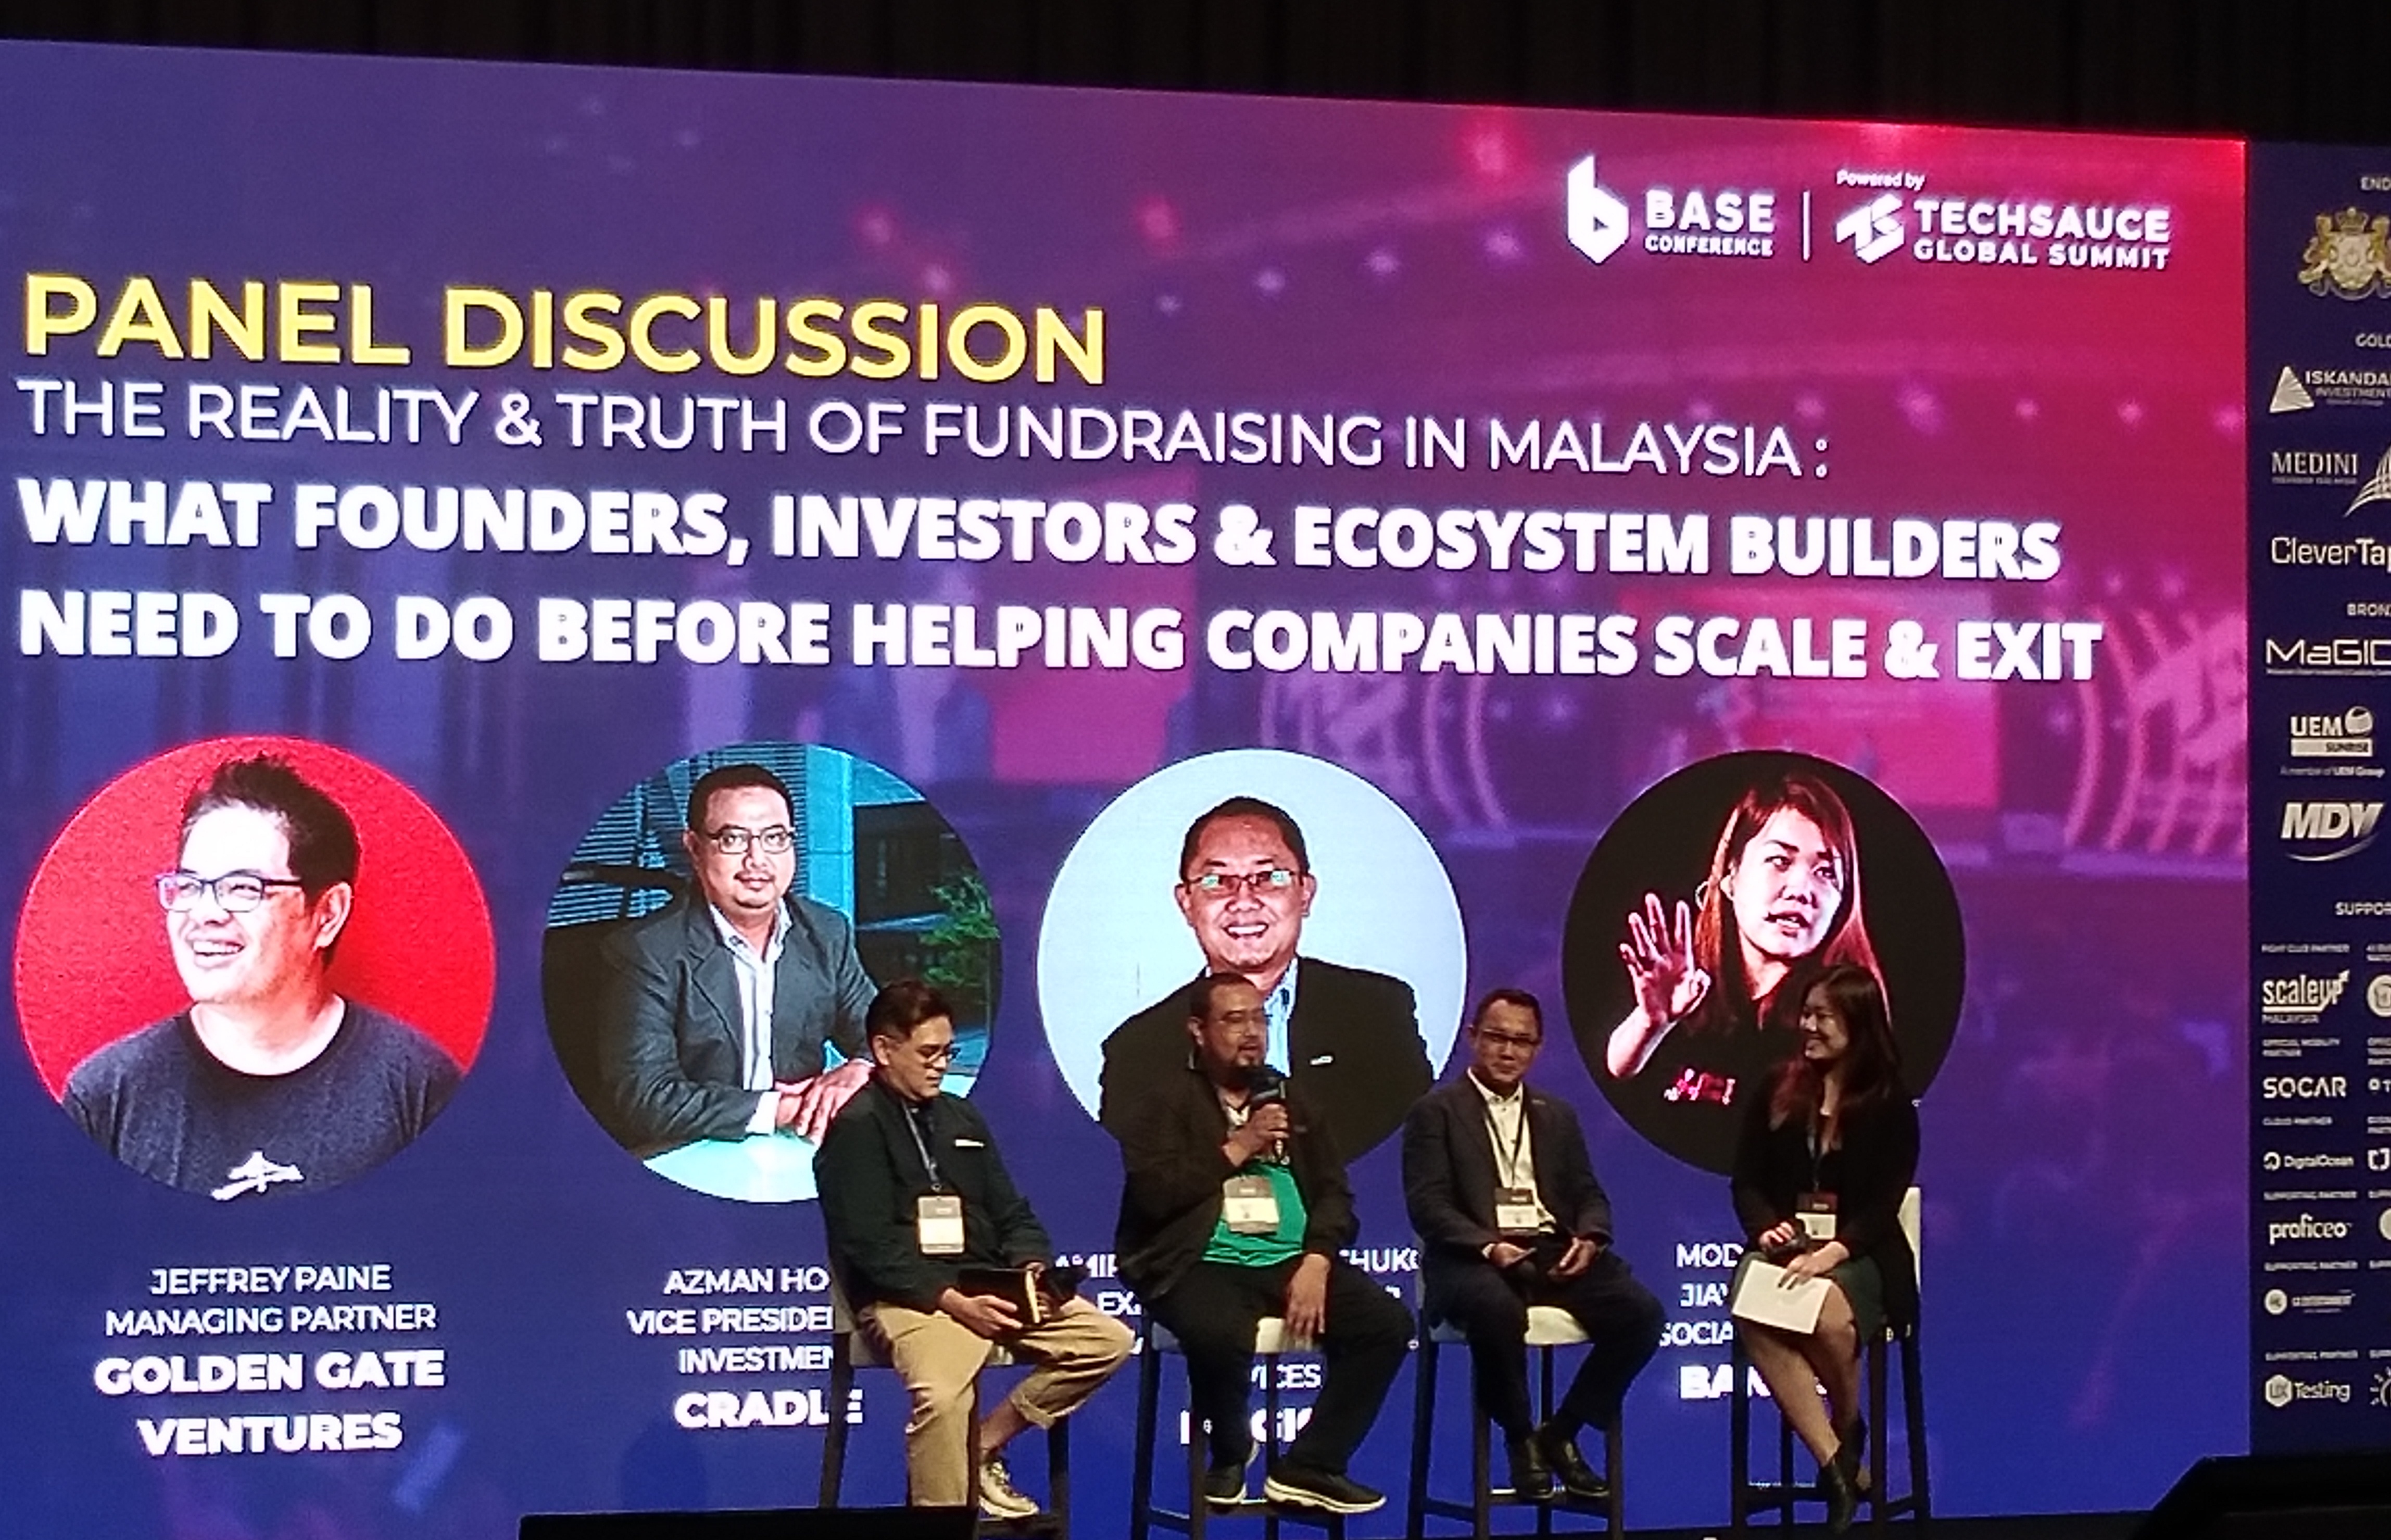 Startup founders in Malaysia need to learn from others around the region